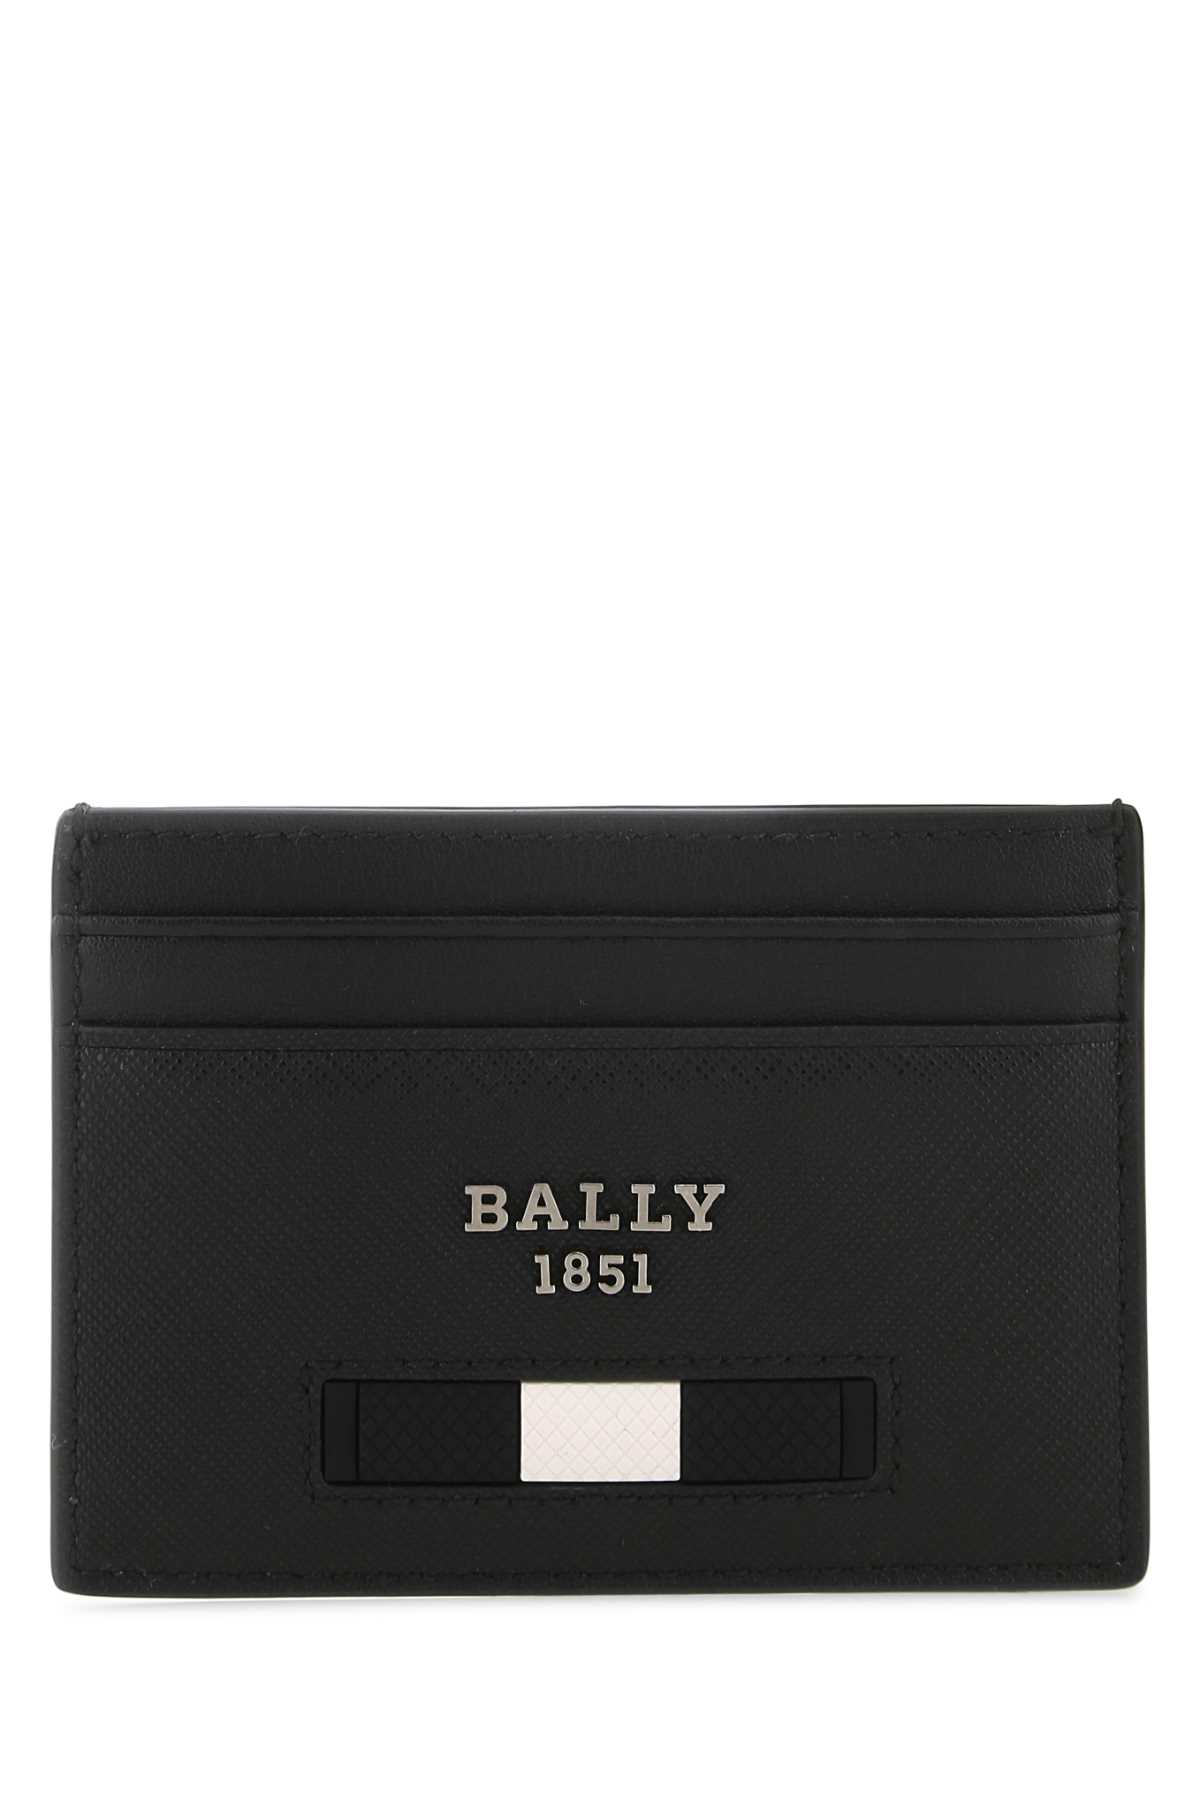 Bally Black Leather Card Holder In F100